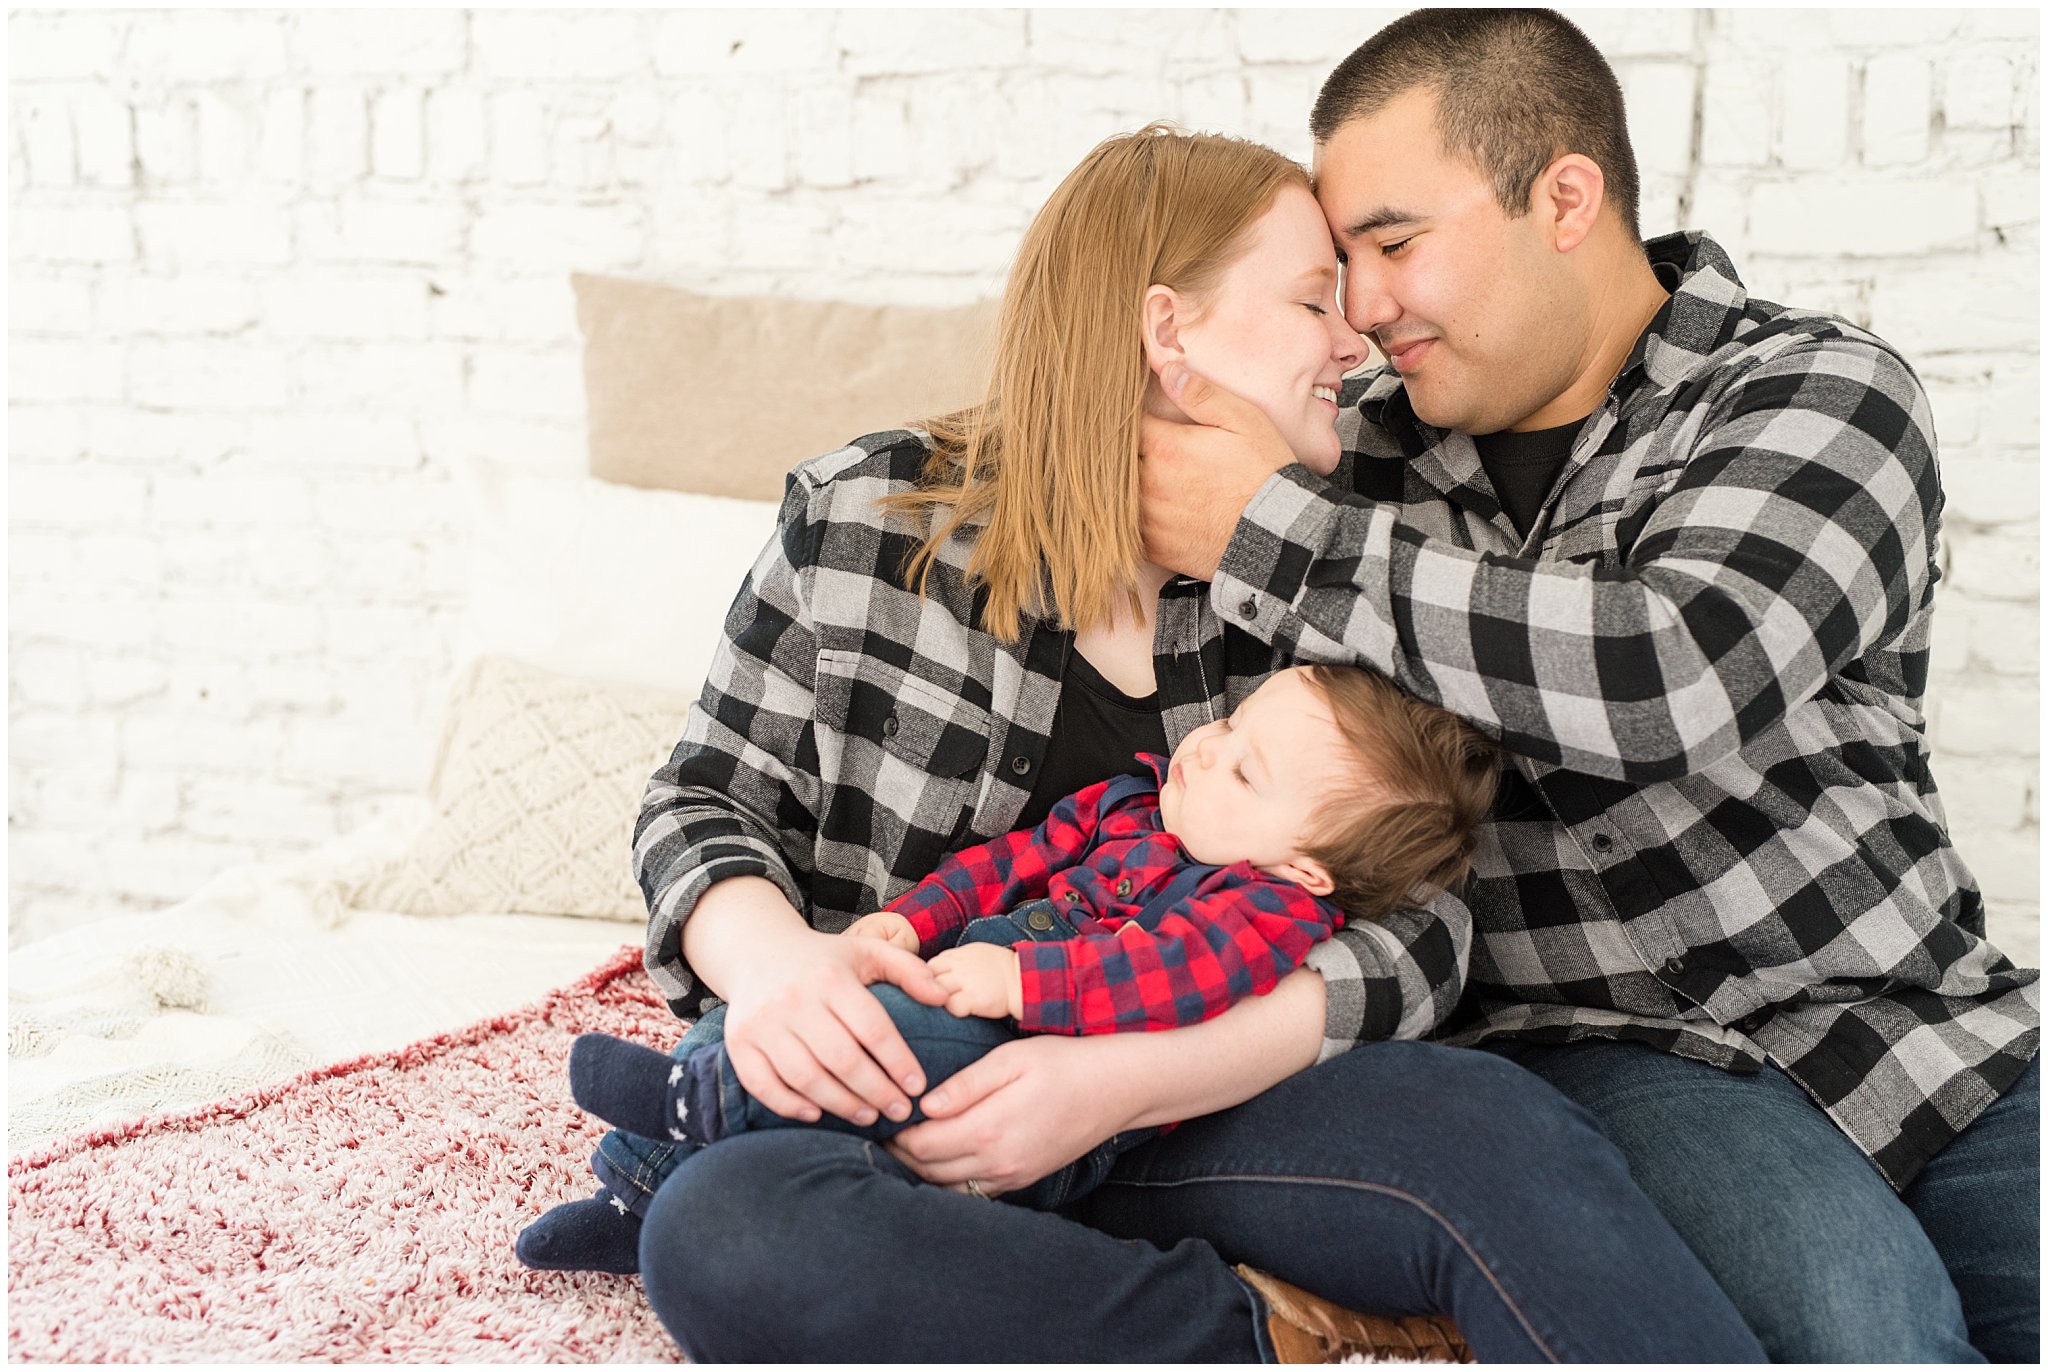 Parents nuzzle close and hold sleeping baby boy on bed | Family Christmas session at the 5th floor | Utah Photographers | Jessie and Dallin Photography